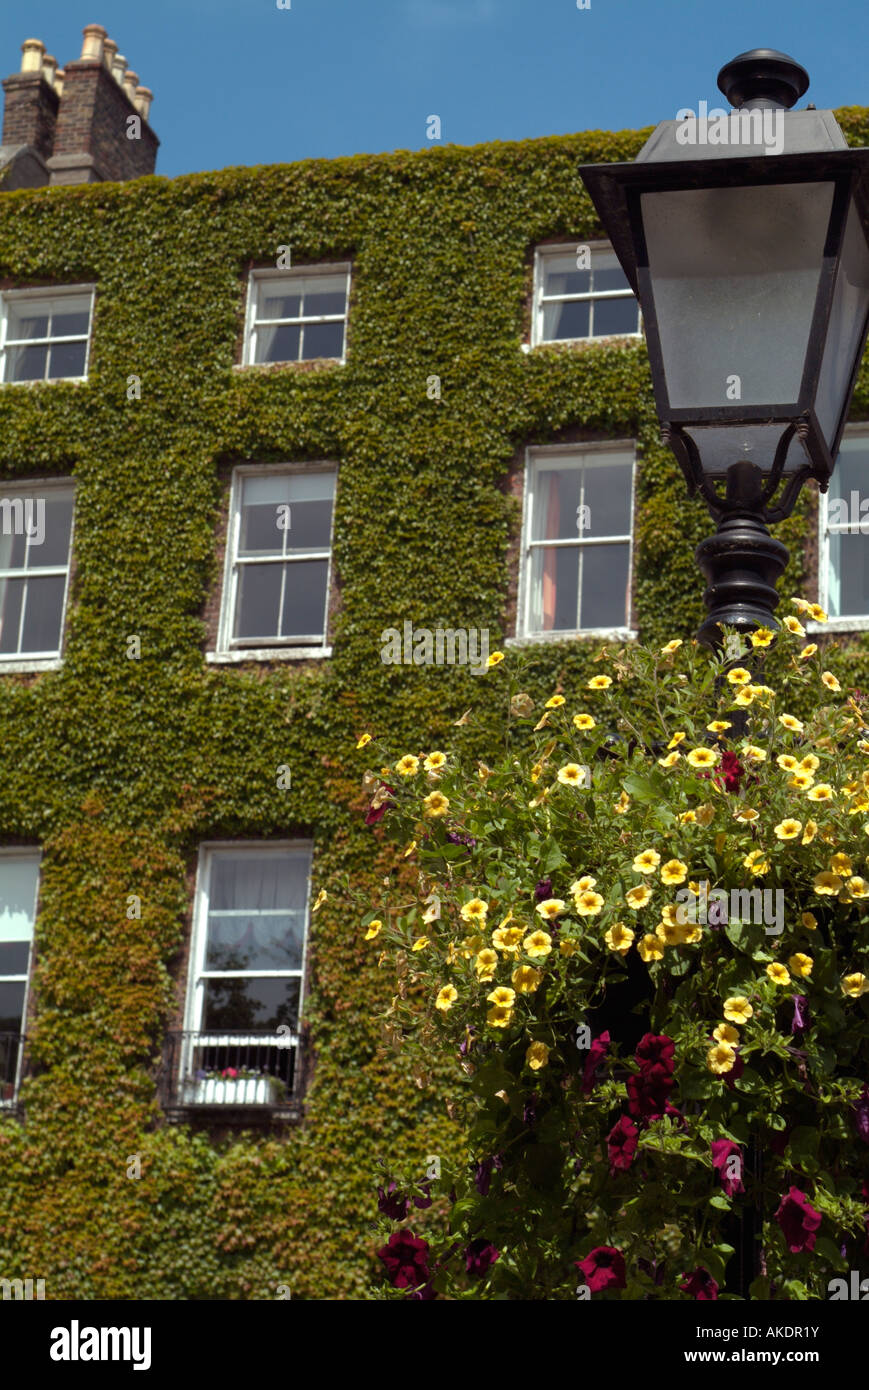 elegant street lamp with hanging flower basket in front of ivy covered georgian multi story house in saint stephens green dublin Stock Photo